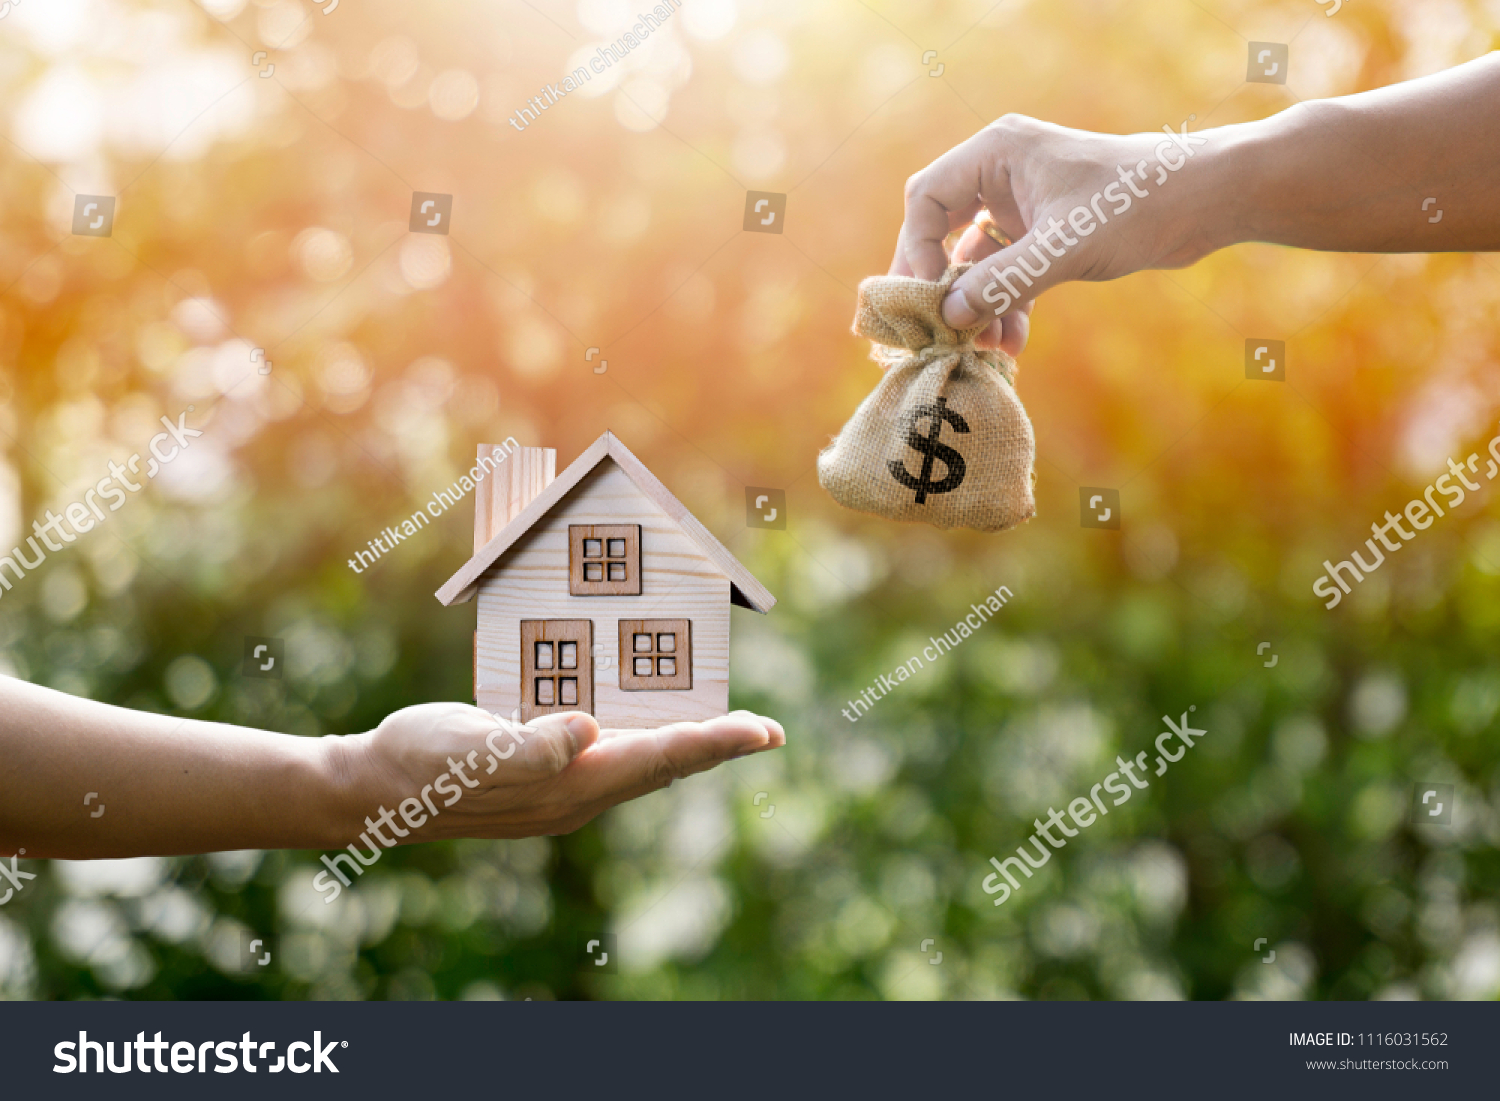 Money bag home and man hands in sunlight represent to exchange or saving money or investing to buy a home or loan to buy a house or real estate or investment for the future. #1116031562